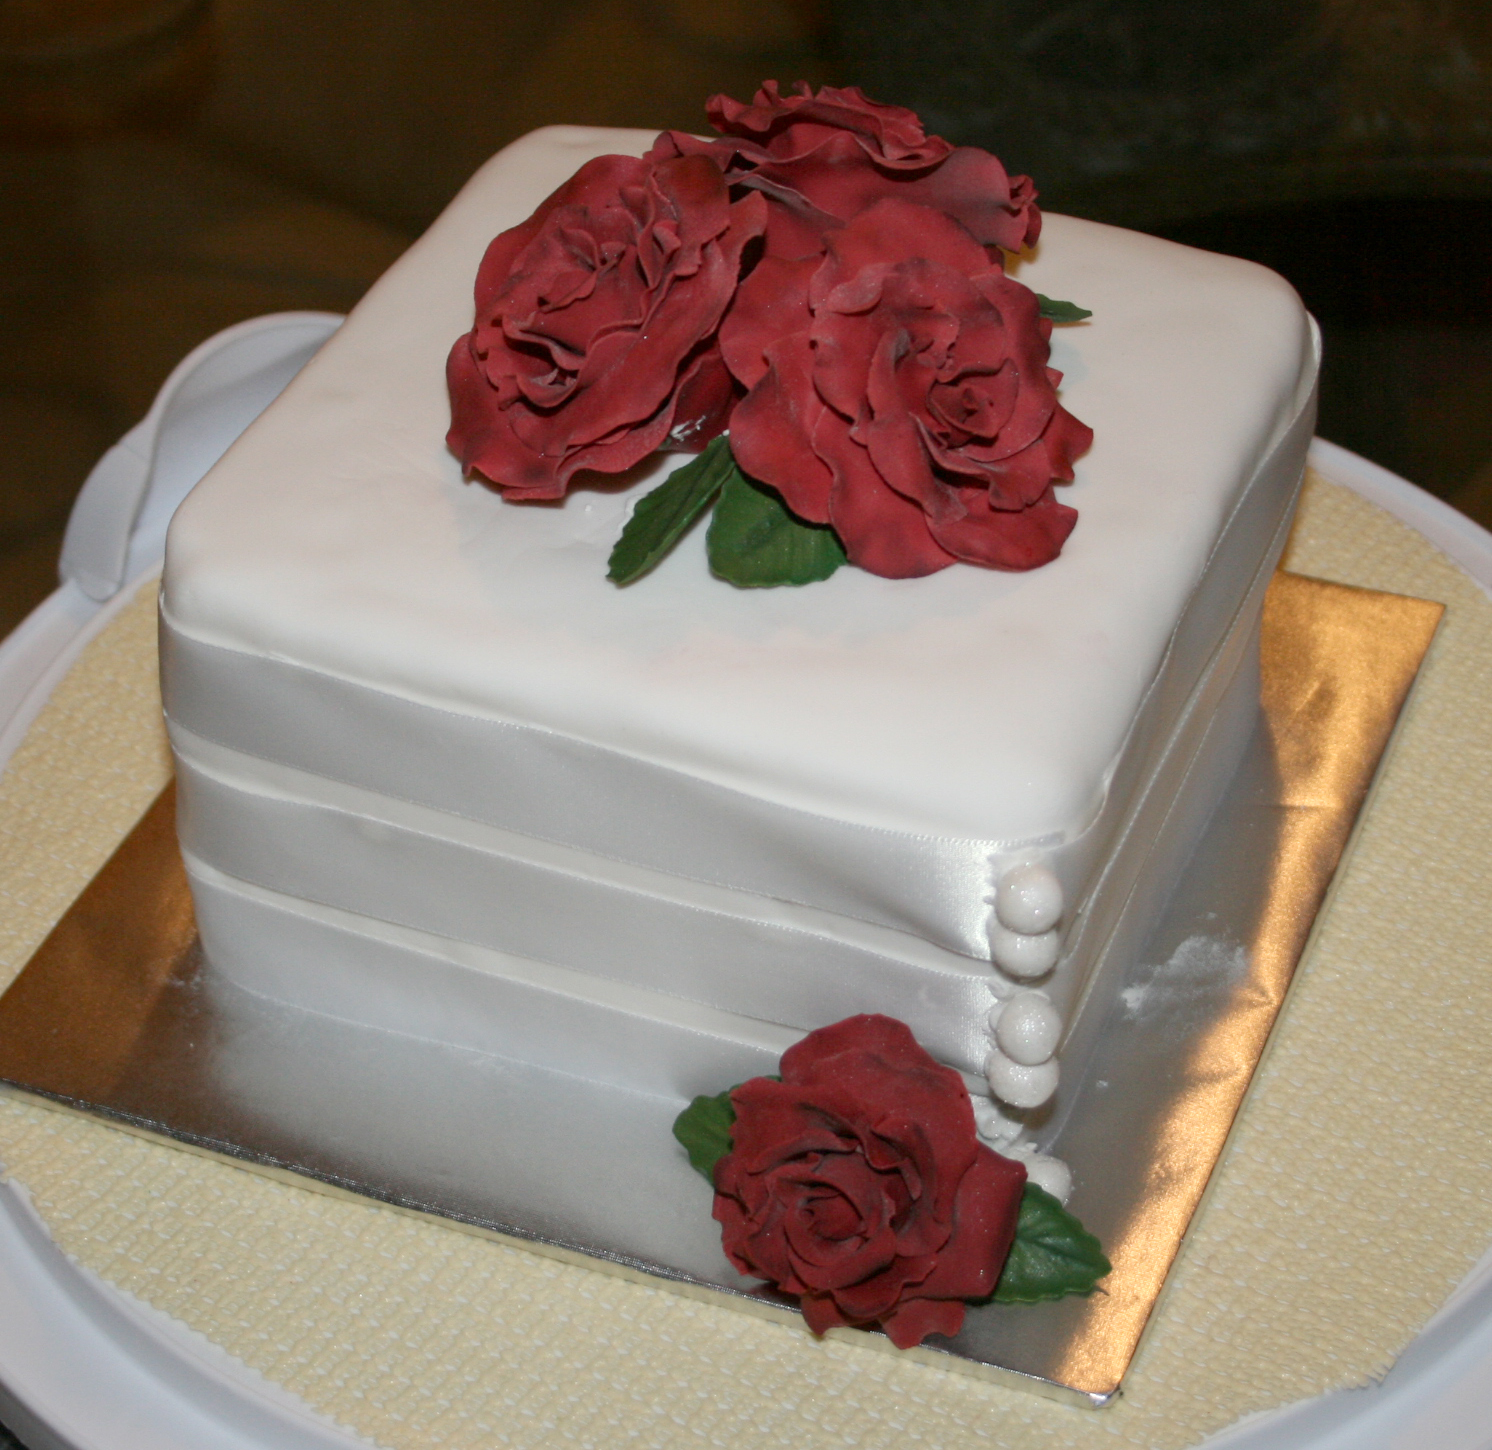  Square Wedding Cake With Roses